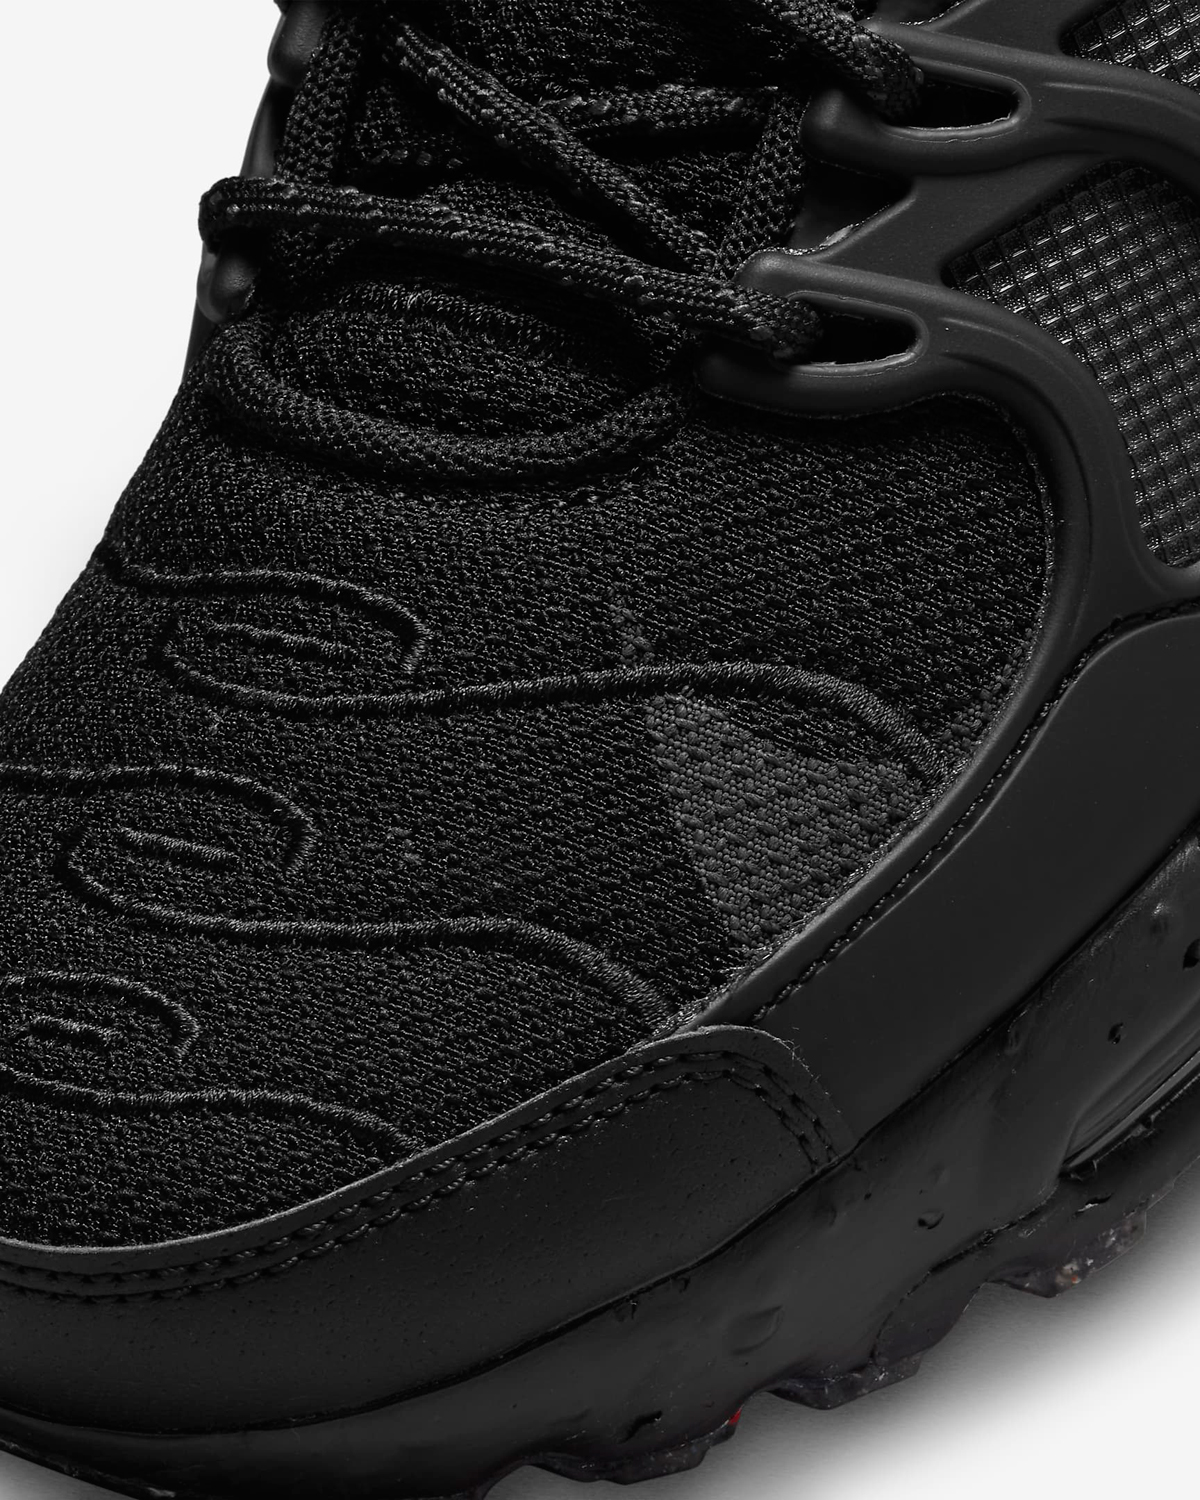 nike-air-max-terrascape-plus-black-anthracite-release-date-7